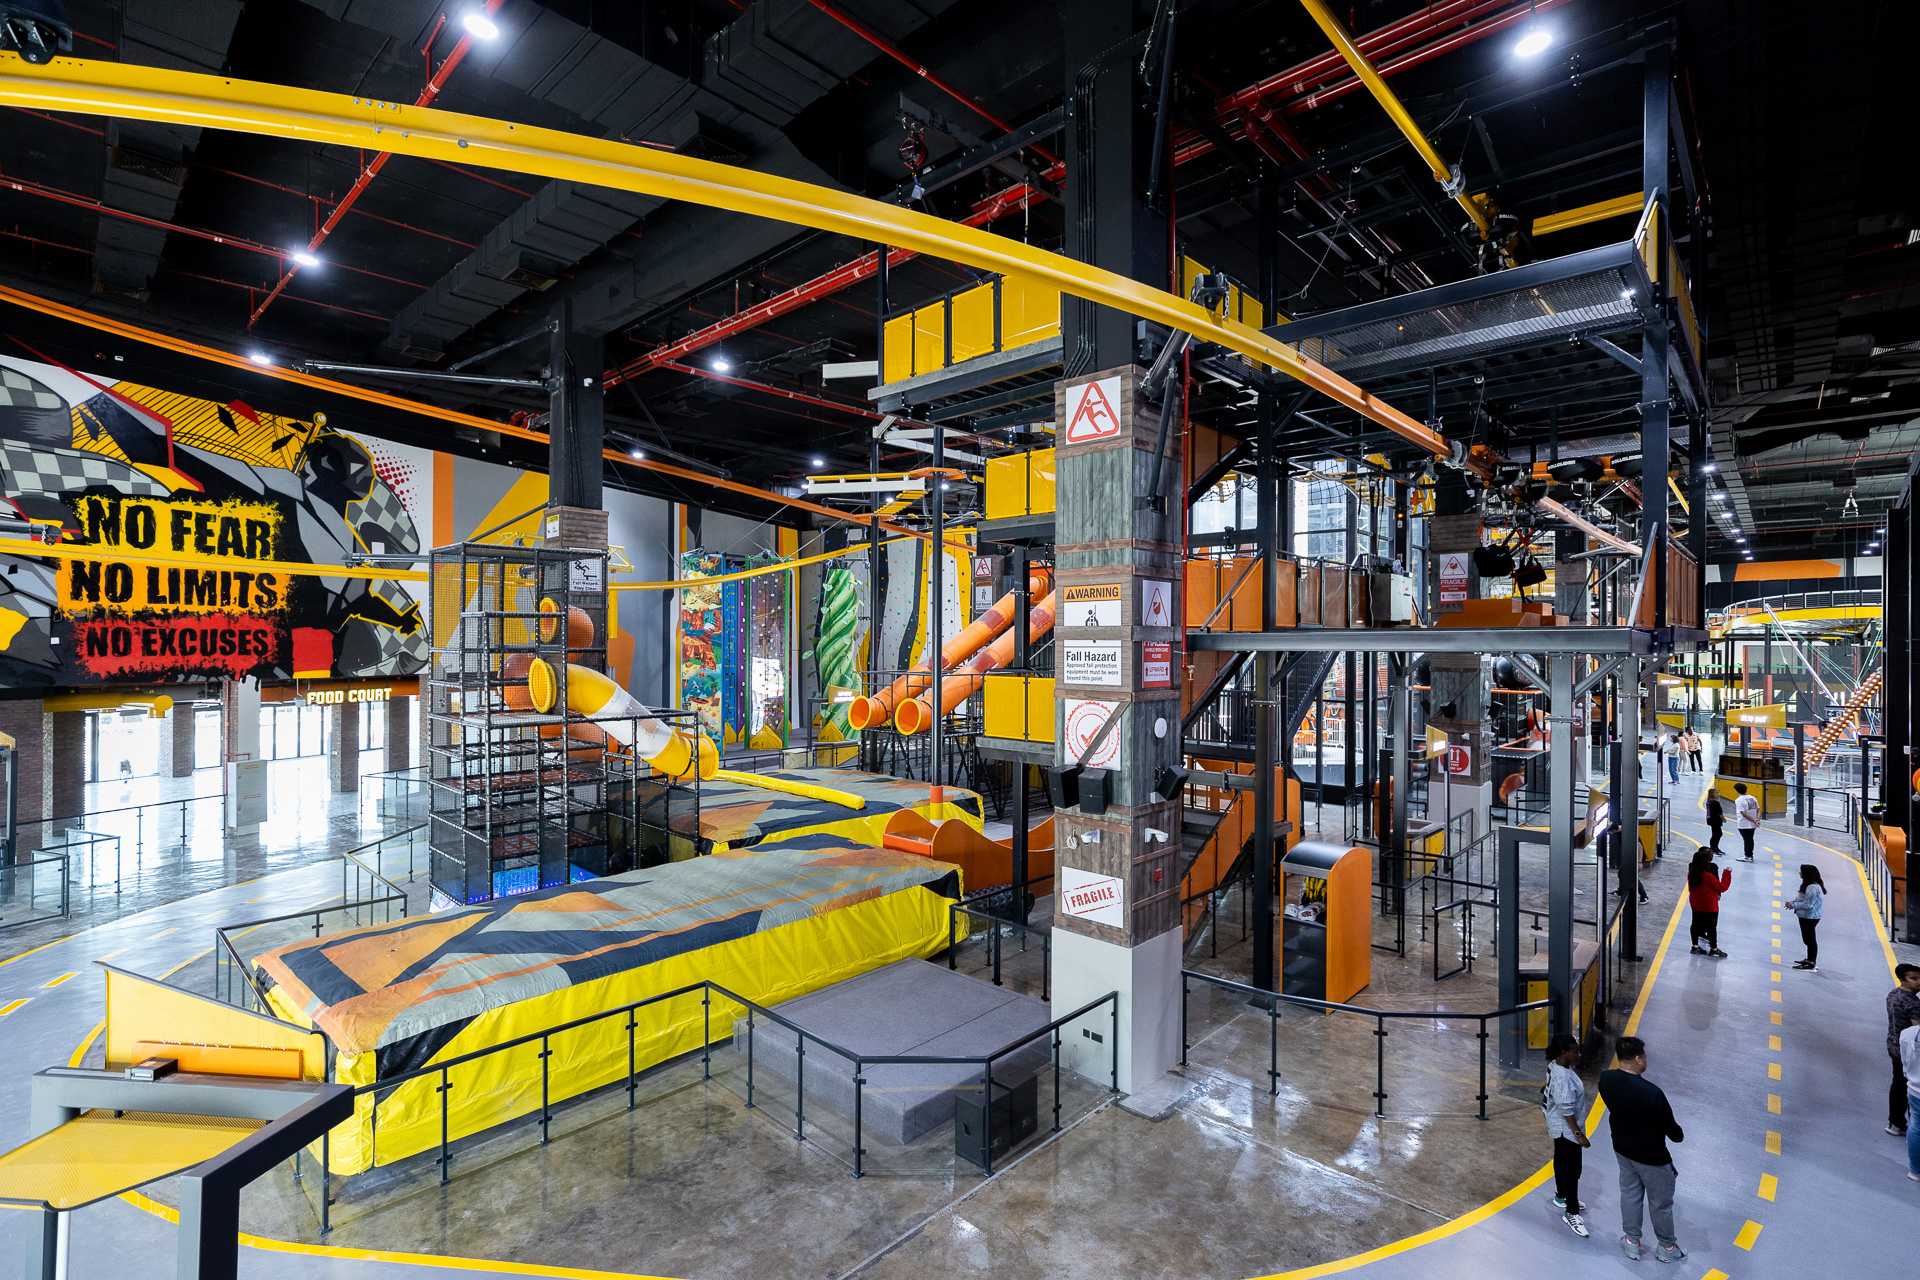 Walltopia Ropes Course, Rollglider, Fun Walls, Cave and Slides in Adrenkark UAE